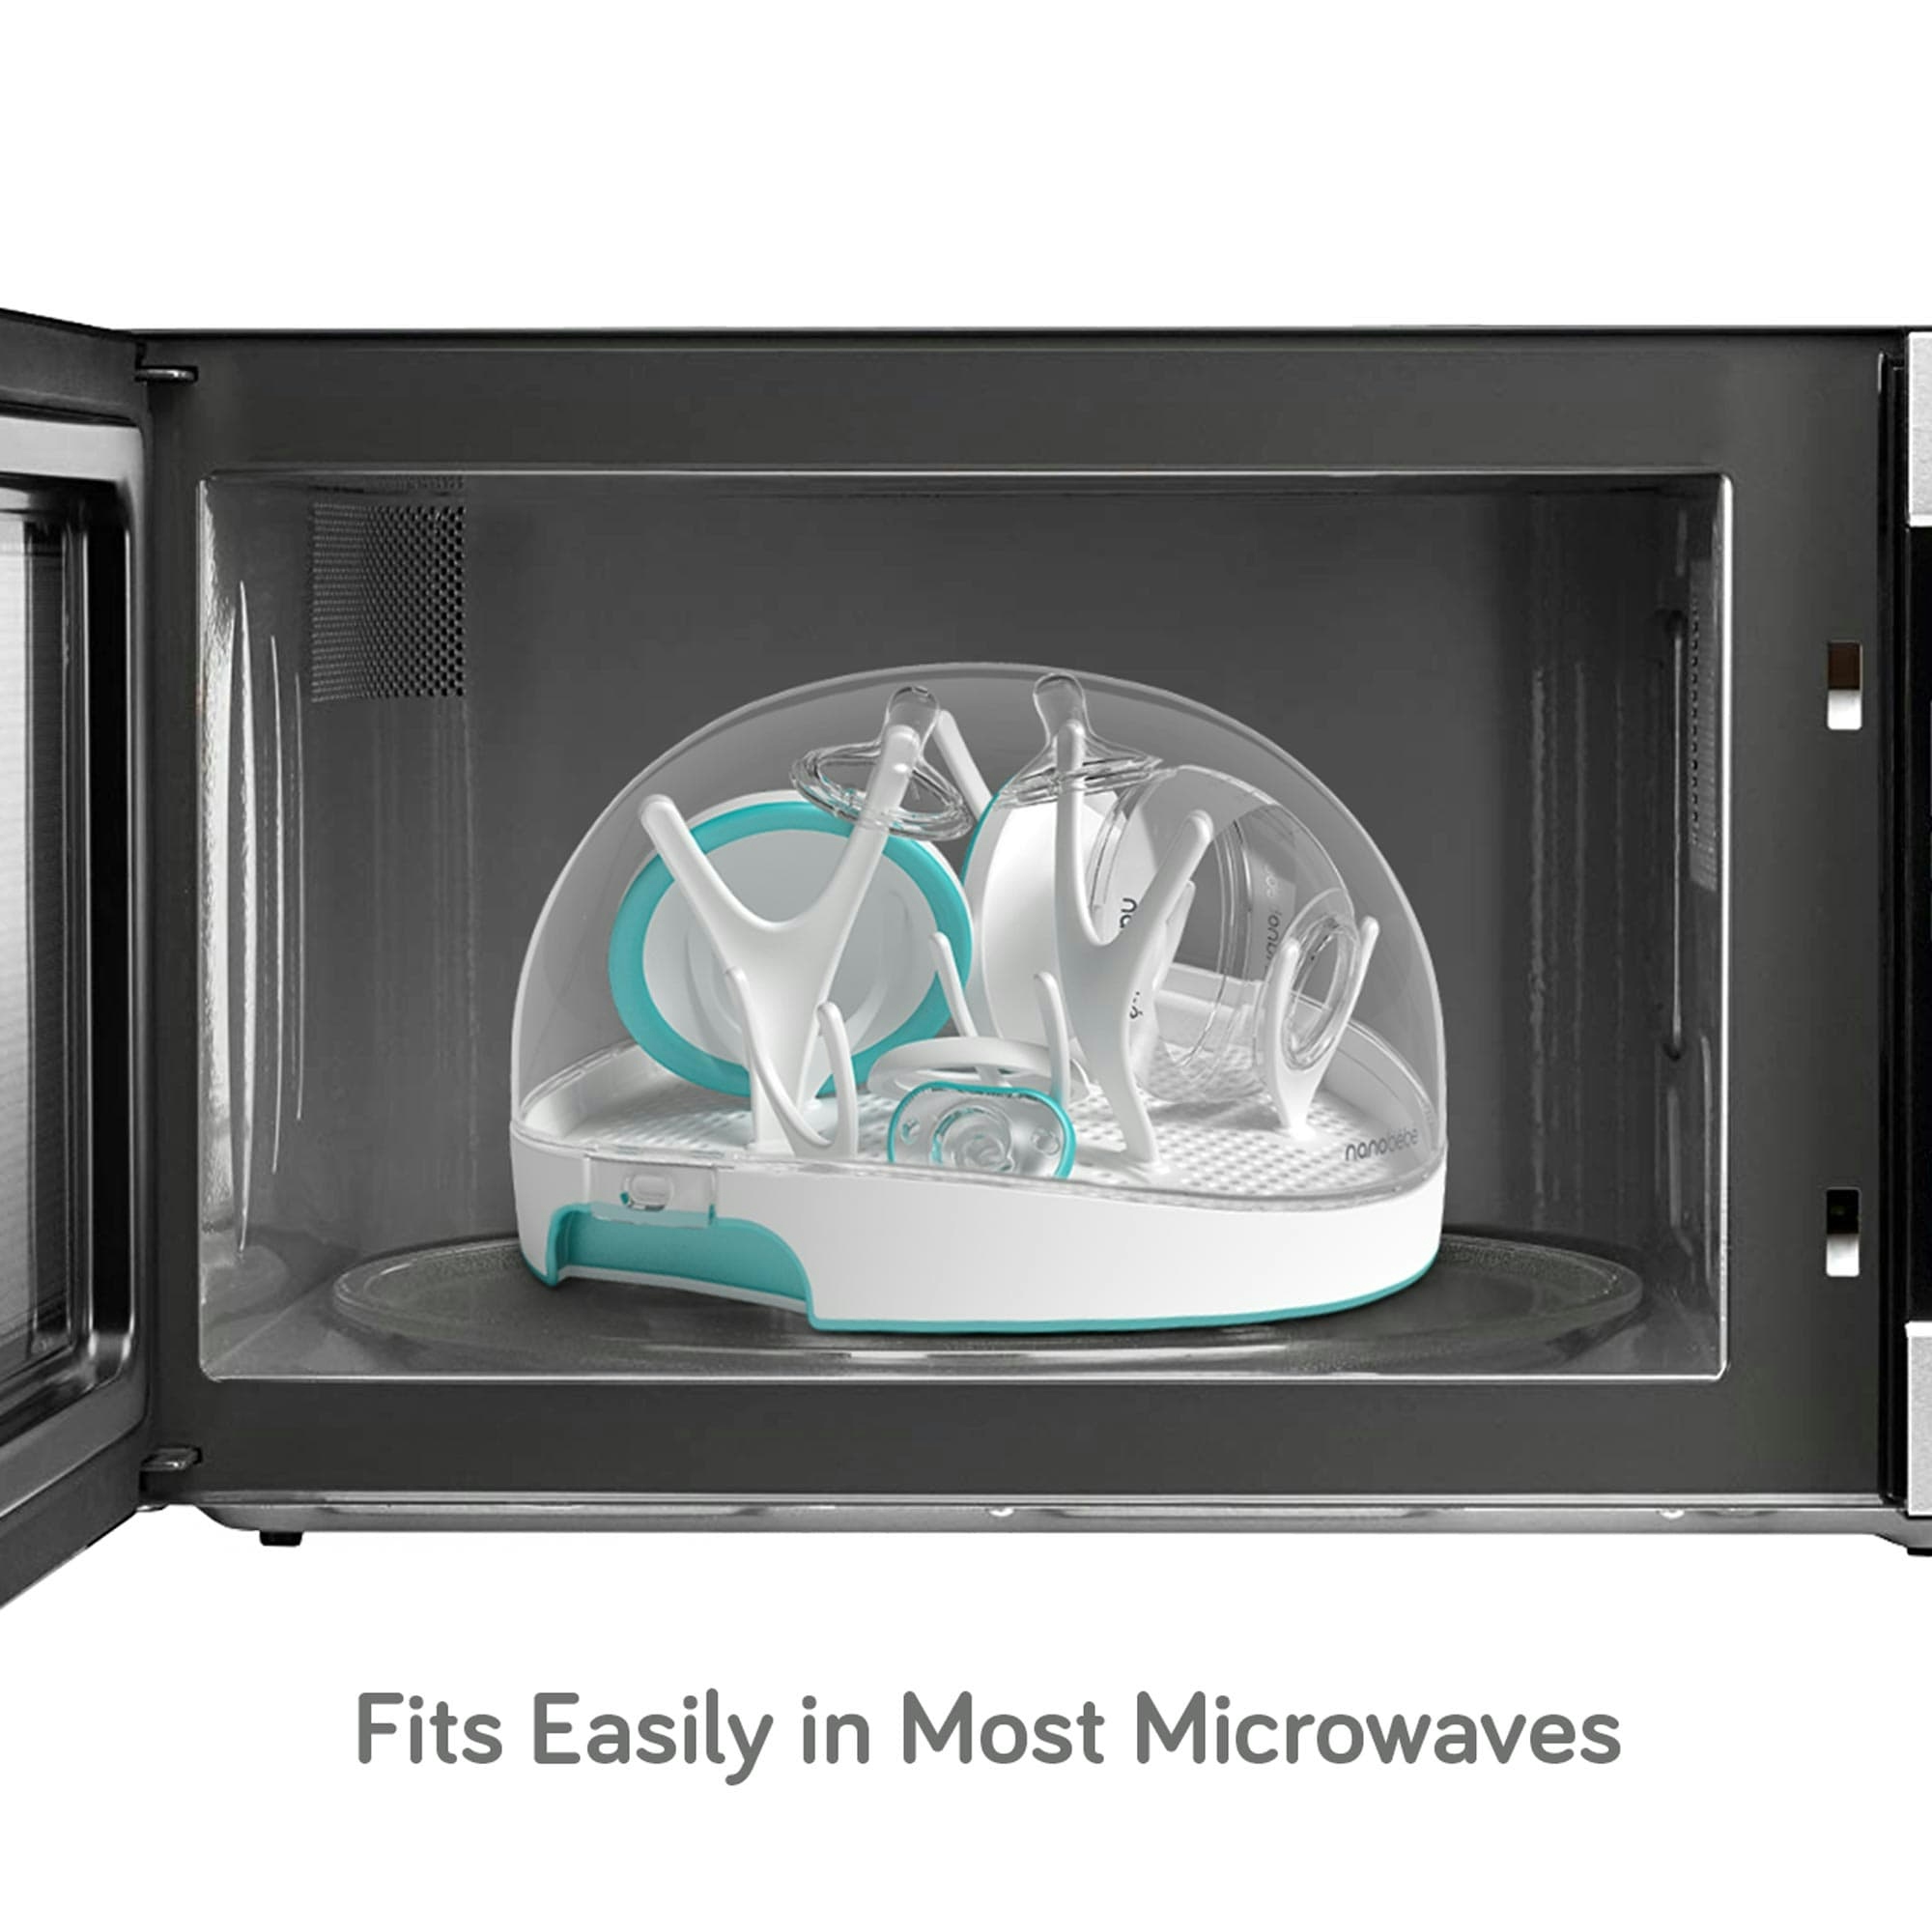 Keep your microwaves ultra clean and germ-free for all the